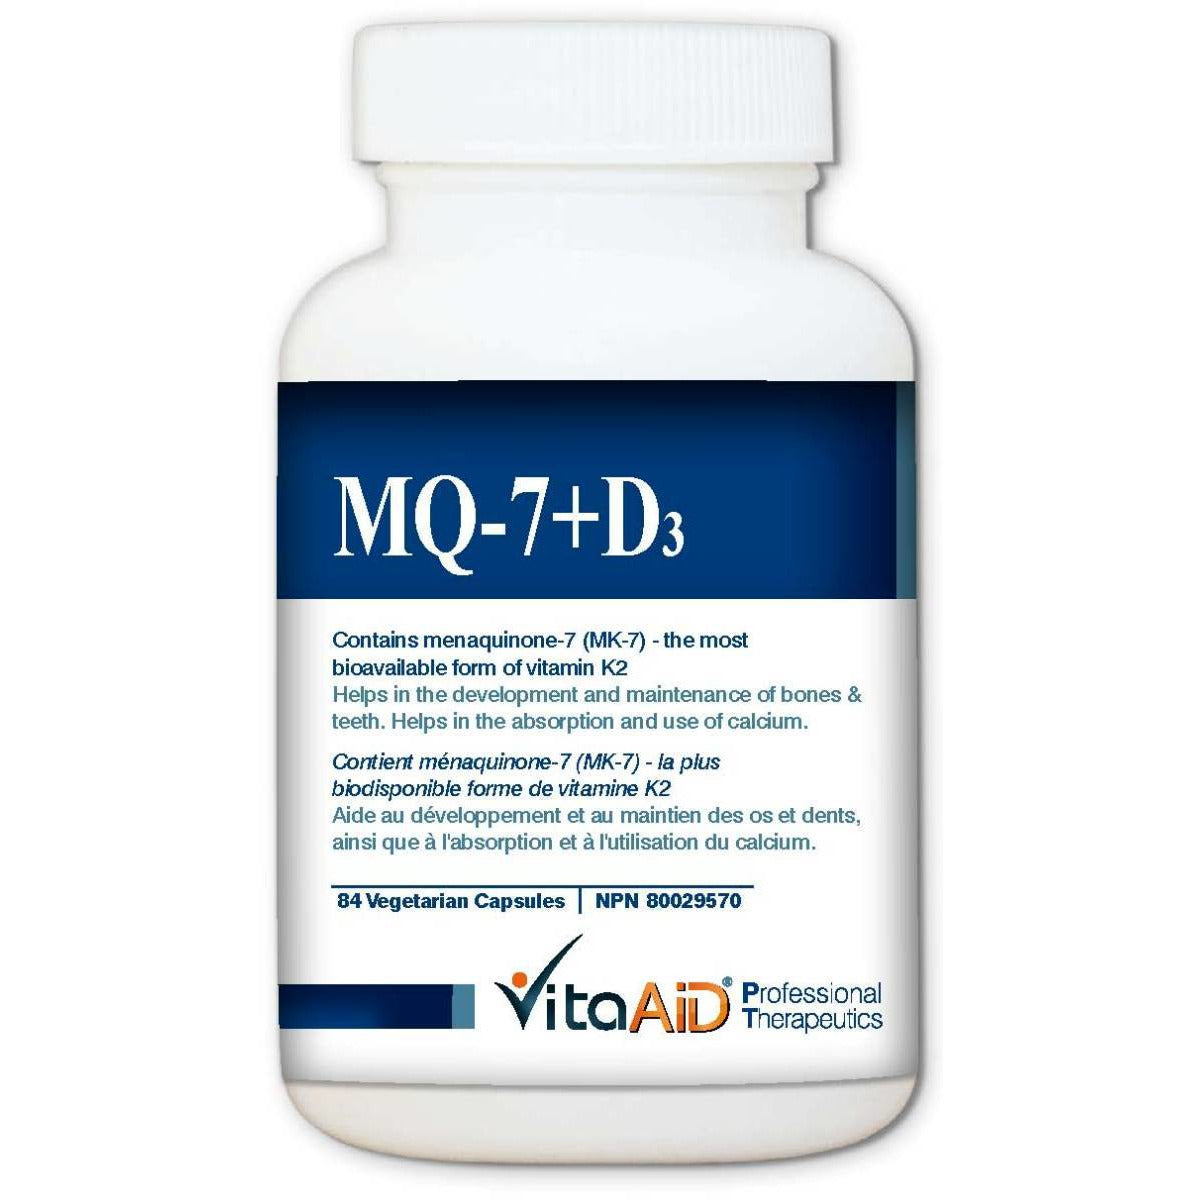 MQ-7 D3  Prevents Vascular Calcification and CVD, Increases Bone Mineral Density, and Promotes Healthy Platelet Function 84 veg caps - iwellnessbox